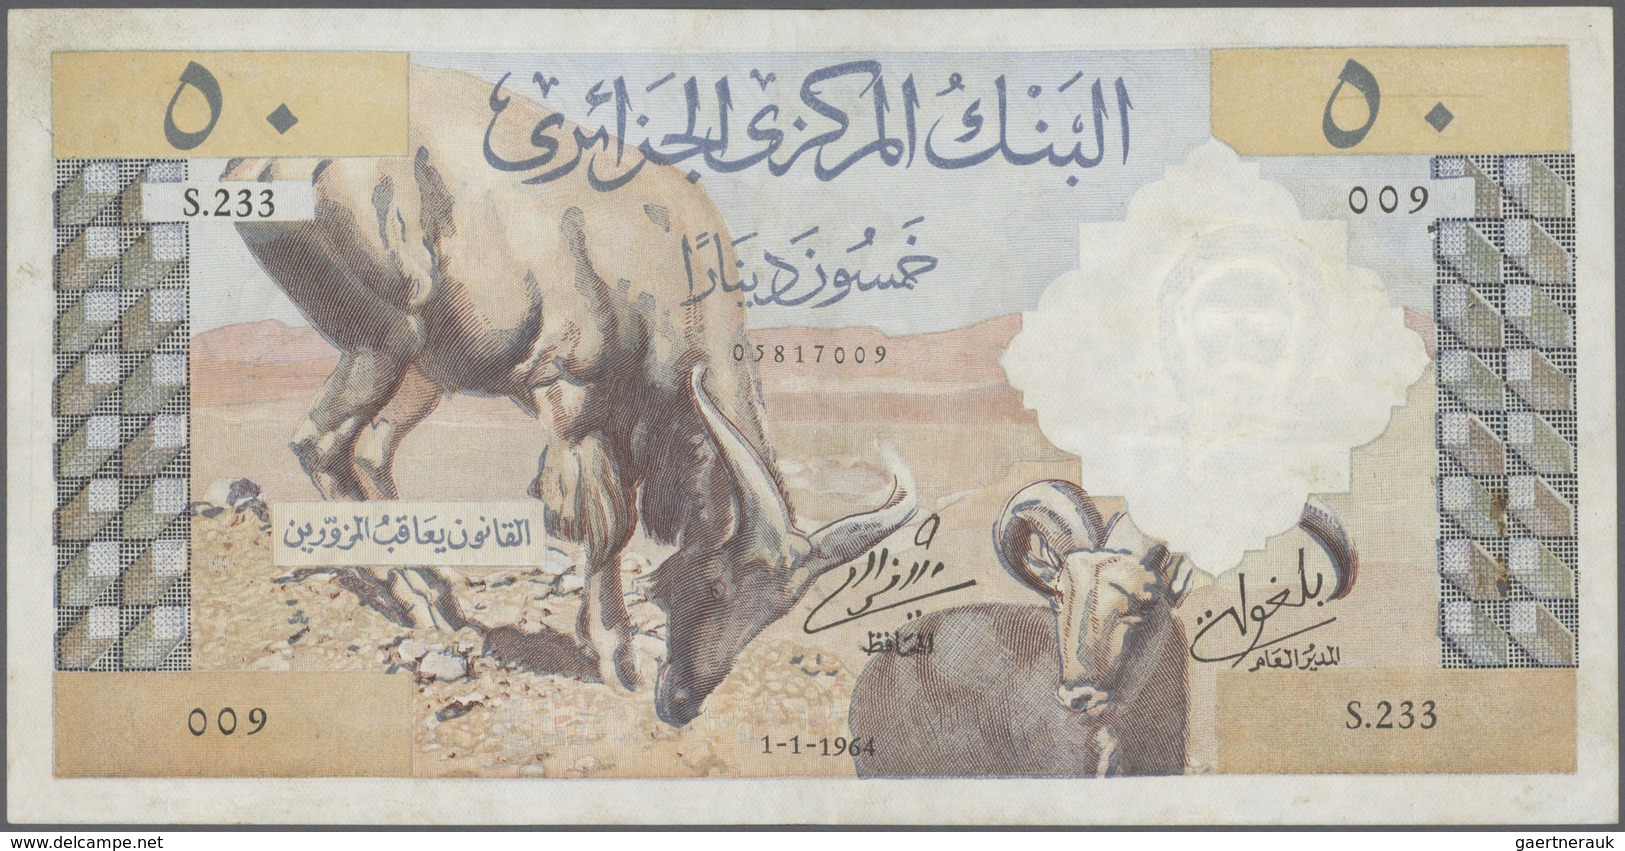 Algeria / Algerien: Set Of 2 Notes 50 Dinars 1964 P. 124, Both In Lightly Used Condition, Not Washed - Algérie